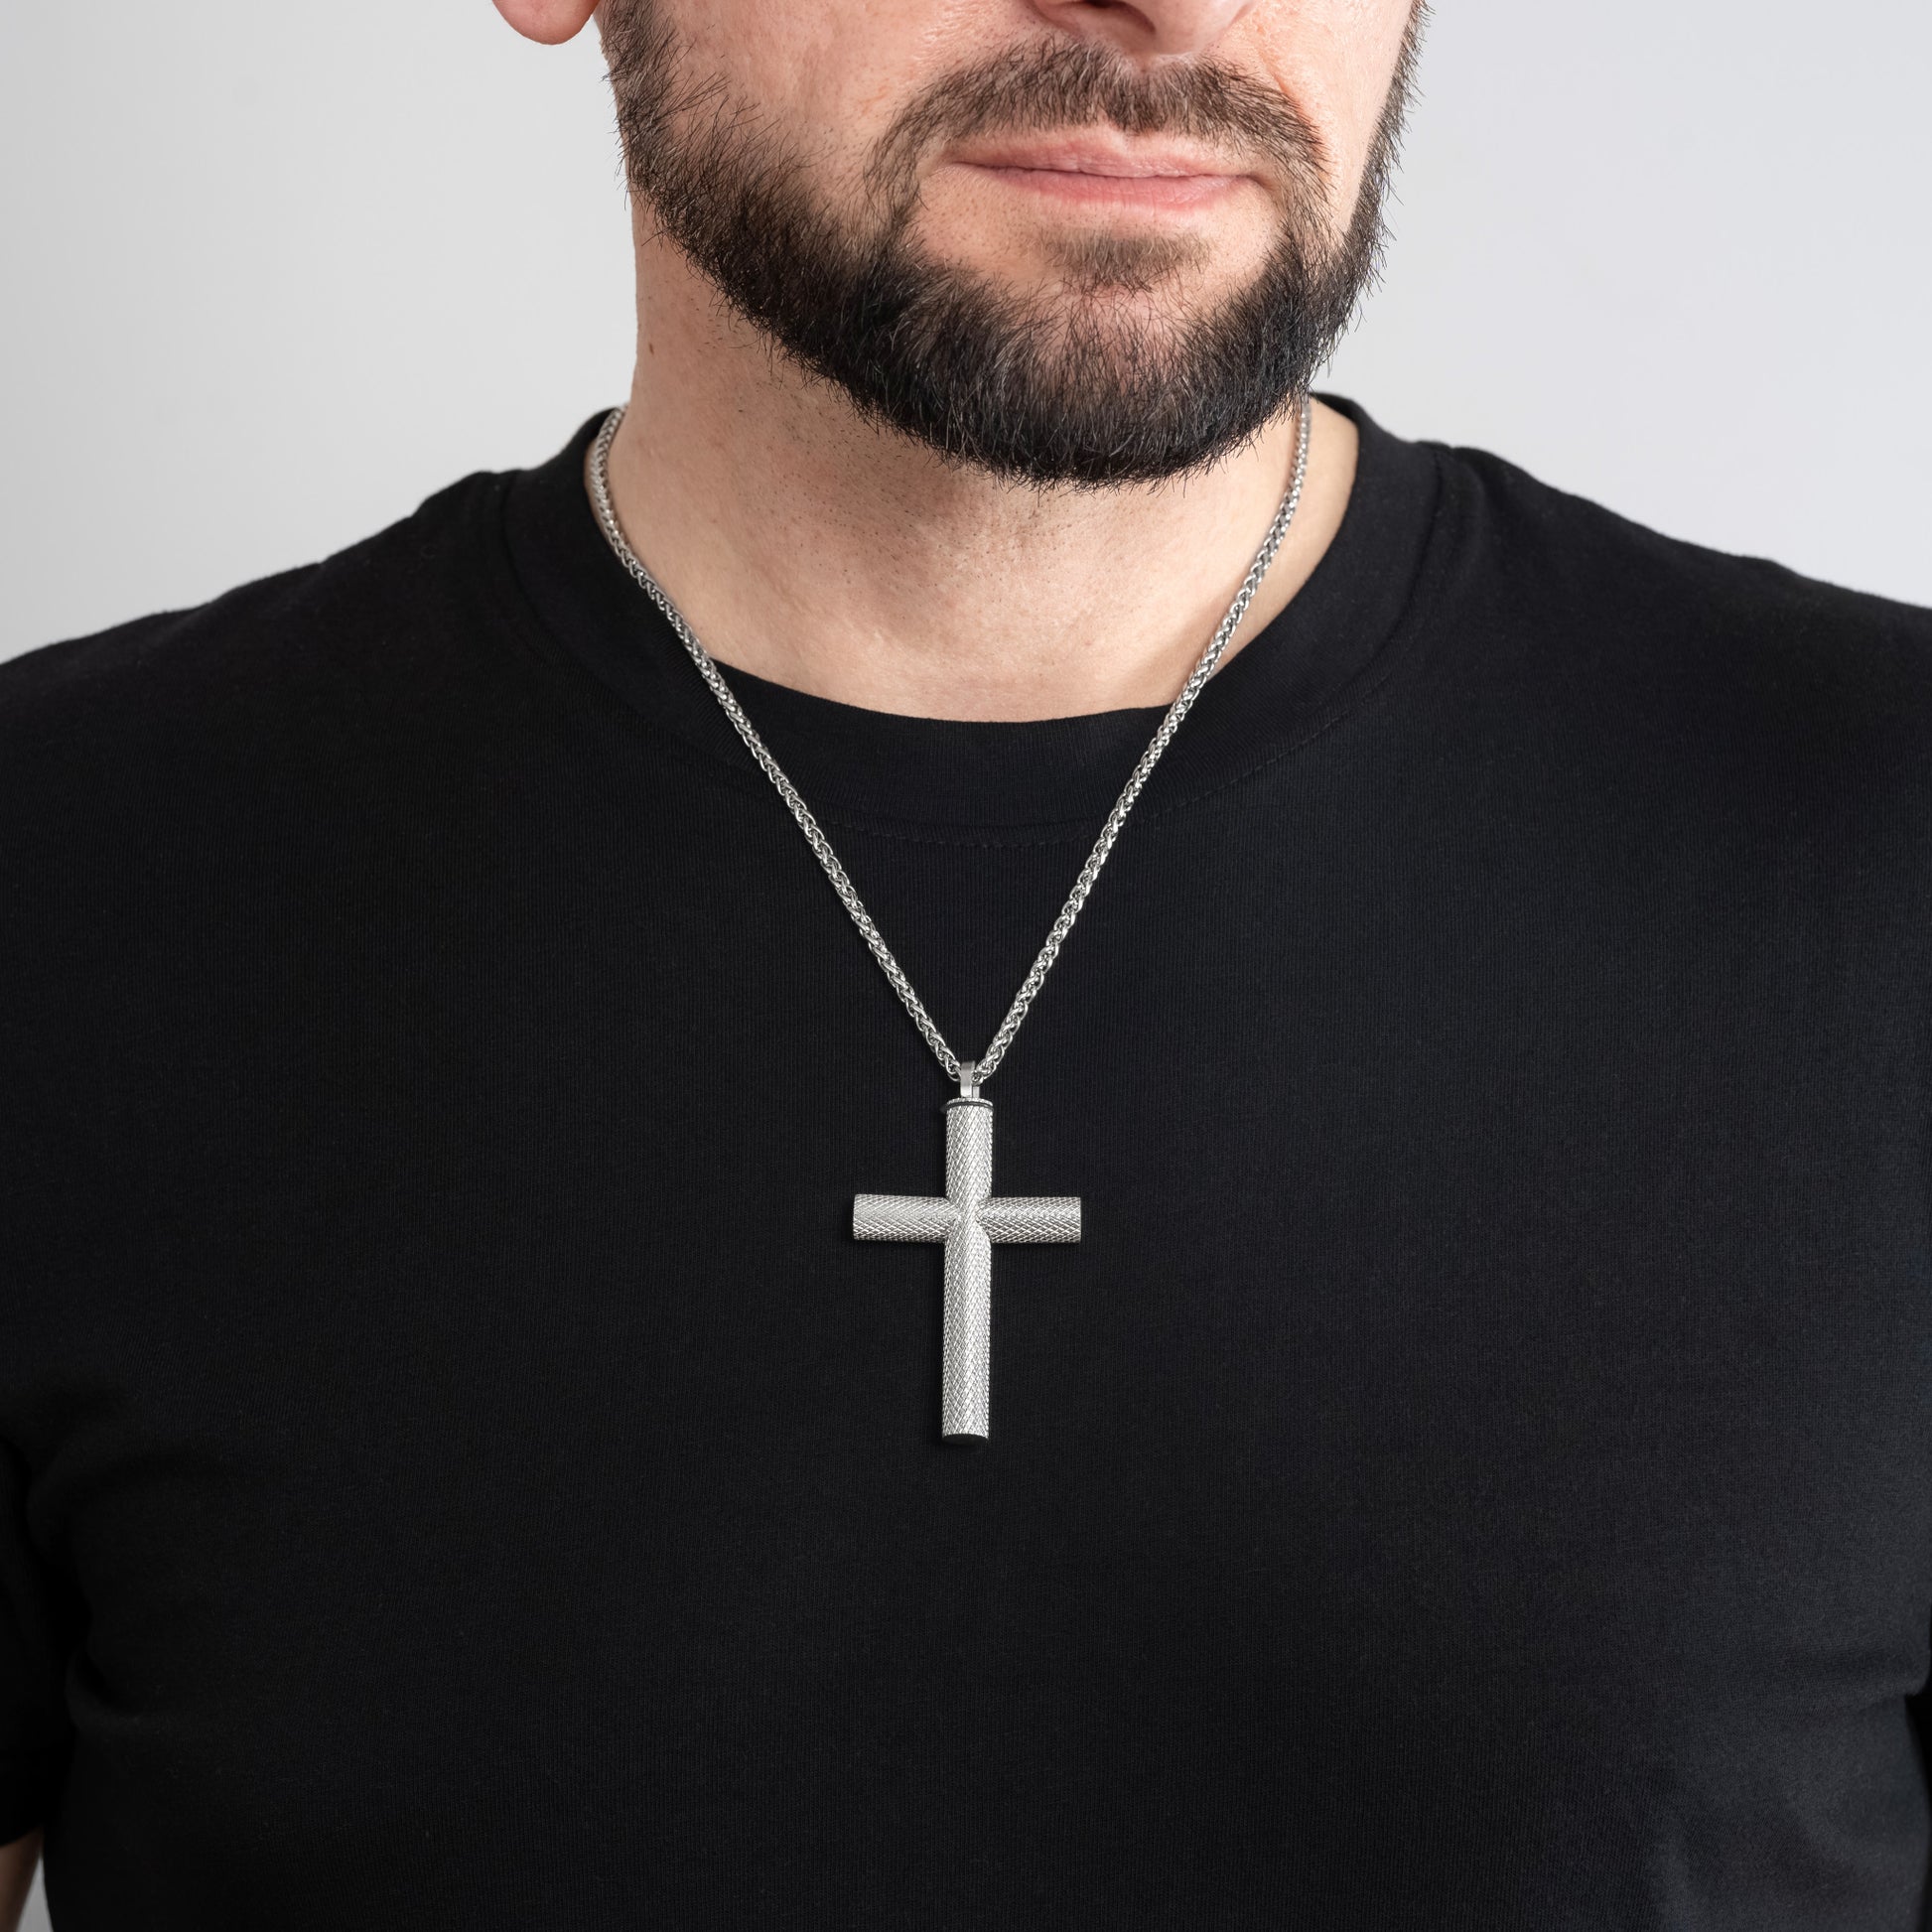 A male model in a black t-shirt wearing a Bison Cross Silver Self-fill Pendant with a 3mm Silver Spiga chain 22 inches.